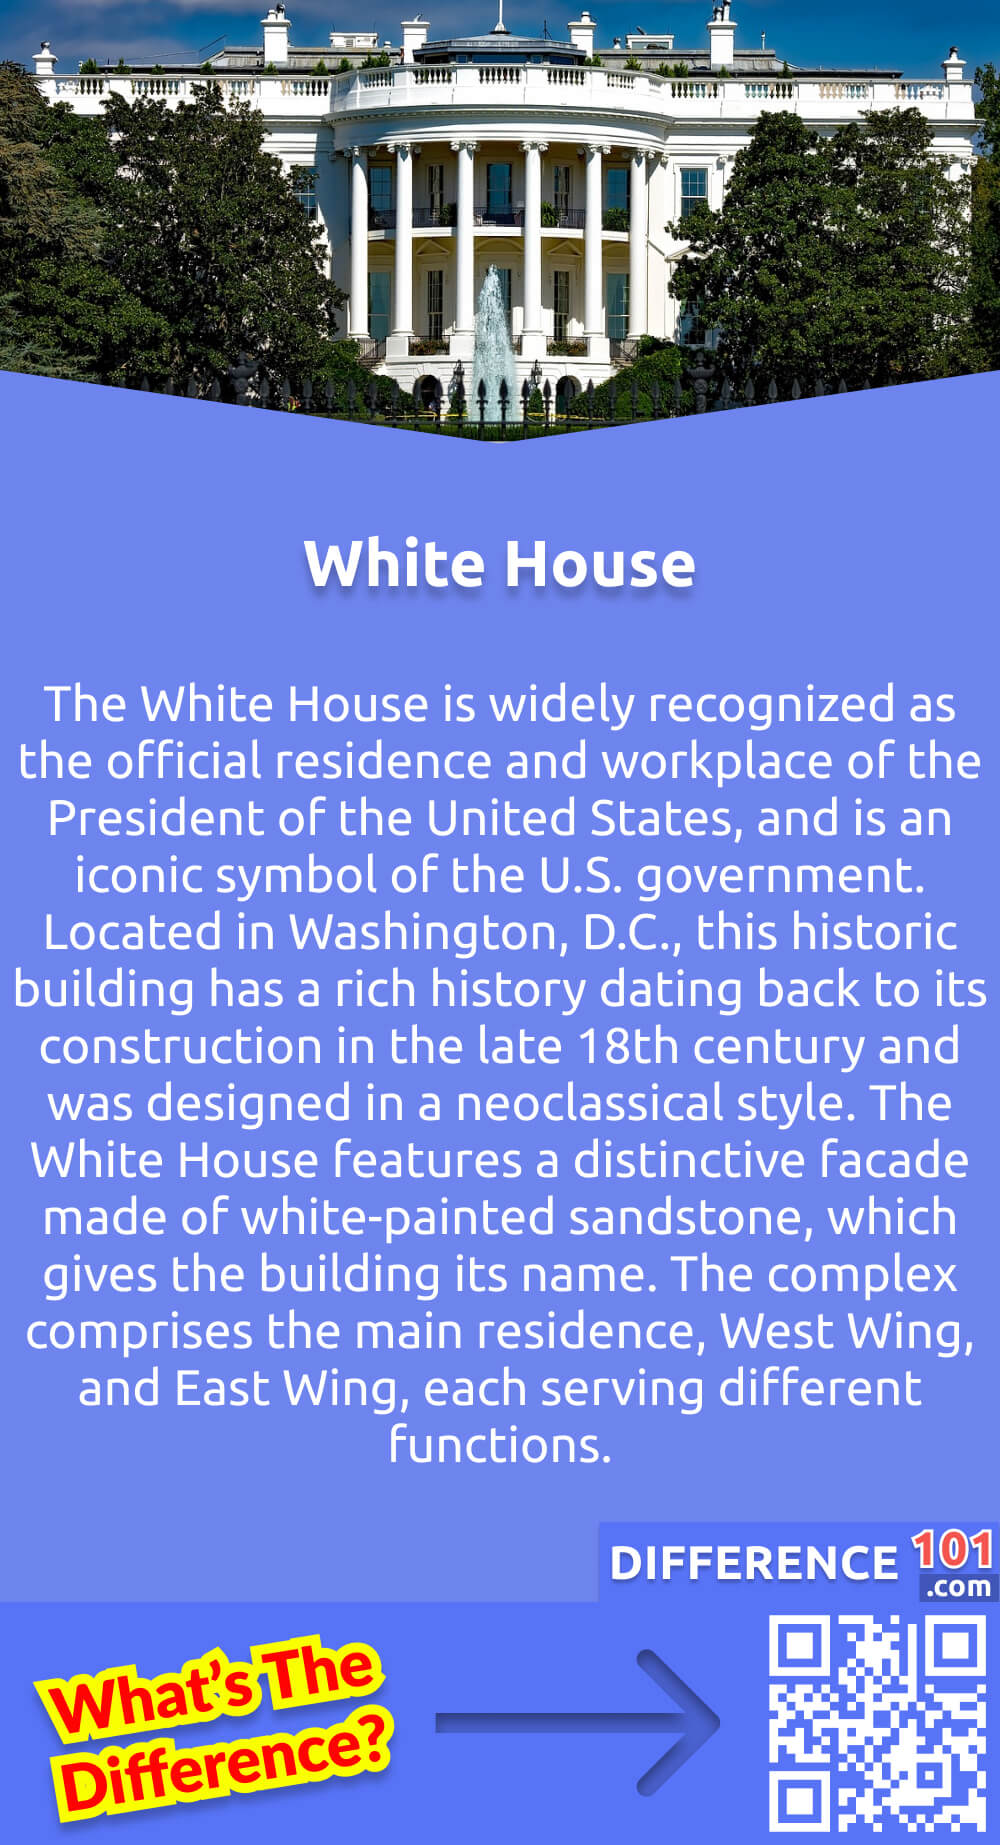 What Is White House? The White House is widely recognized as the official residence and workplace of the President of the United States, and is an iconic symbol of the U.S. government. Located in Washington, D.C., this historic building has a rich history dating back to its construction in the late 18th century and was designed in a neoclassical style. The White House features a distinctive facade made of white-painted sandstone, which gives the building its name. The complex comprises the main residence, West Wing, and East Wing, each serving different functions. While the main residence is where the President and their family live, the West Wing houses the offices of the President's senior staff and advisors, with the East Wing containing ceremonial rooms and the First Lady's offices.